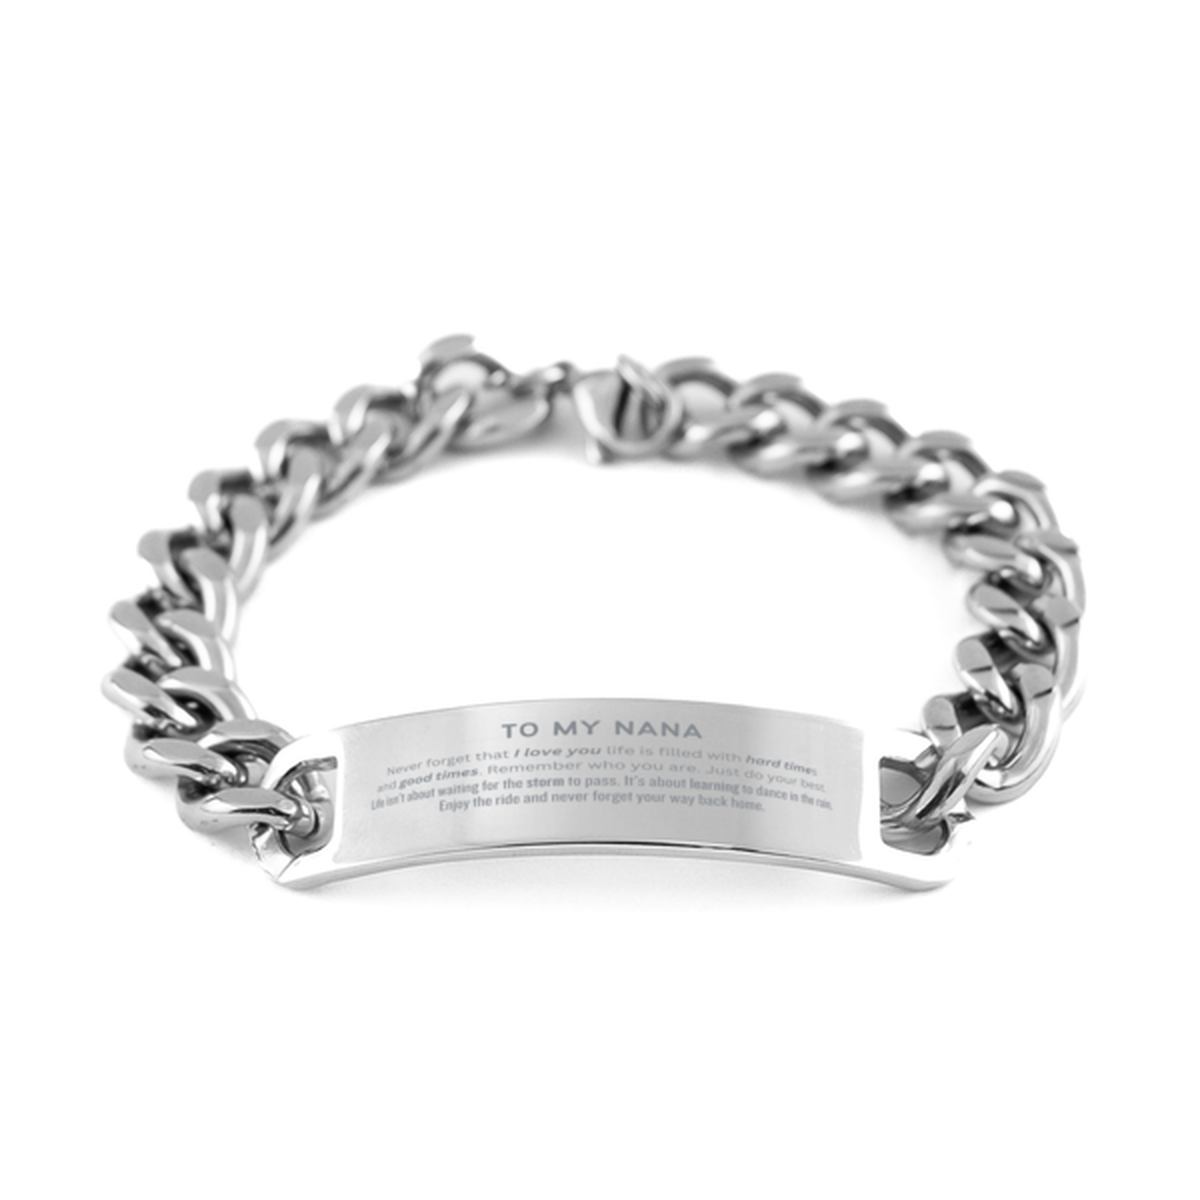 Christmas Nana Cuban Chain Stainless Steel Bracelet Gifts, To My Nana Birthday Thank You Gifts For Nana, Graduation Unique Gifts For Nana To My Nana Never forget that I love you life is filled with hard times and good times. Remember who you are. Just do